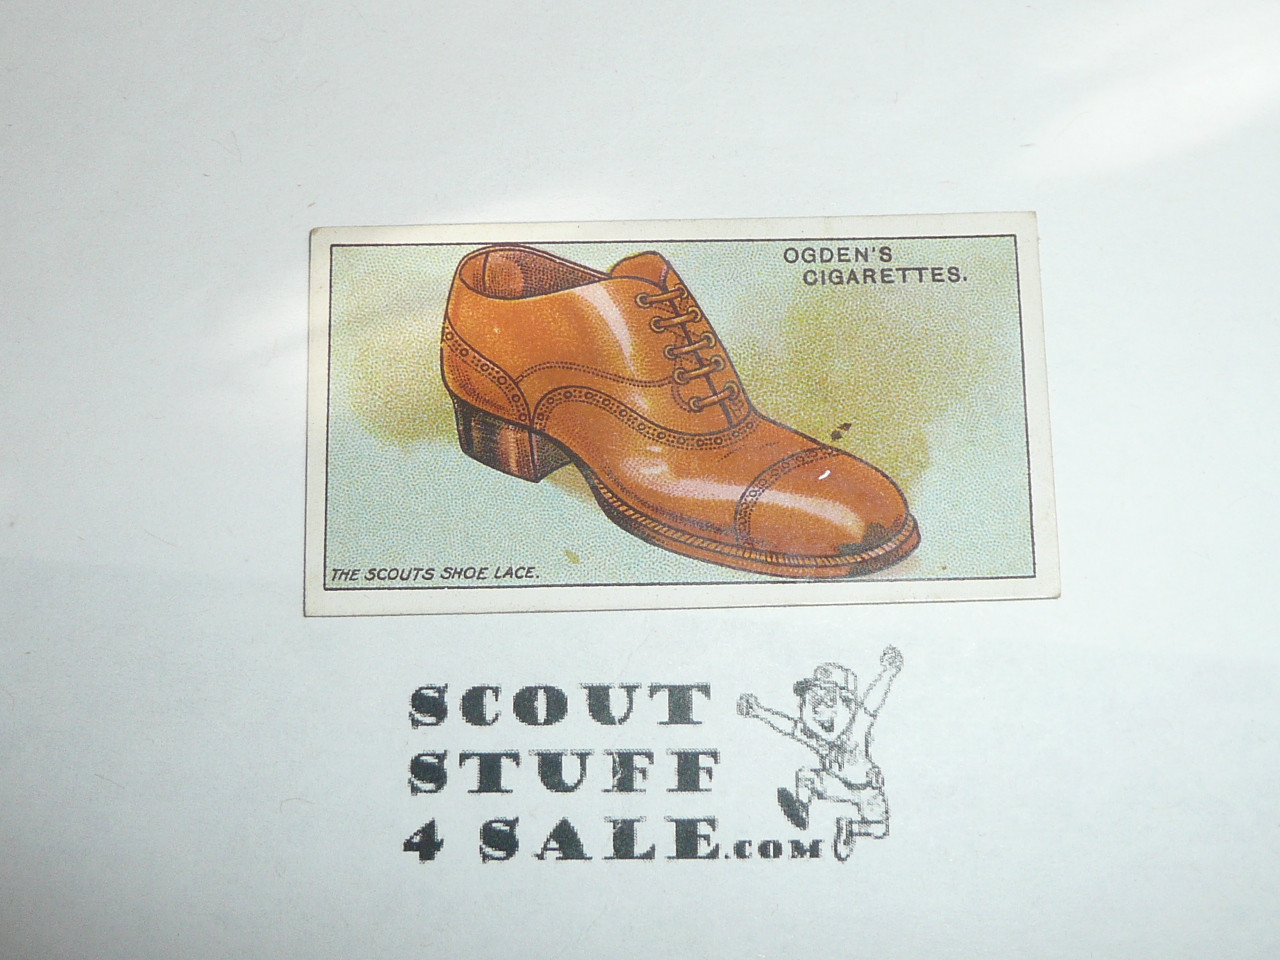 Ogden Tabacco Company Premium Card, Second Boy Scout Series of 50 (Blue Backs), Card #95 How to Tie a Shoe Lace, 1912